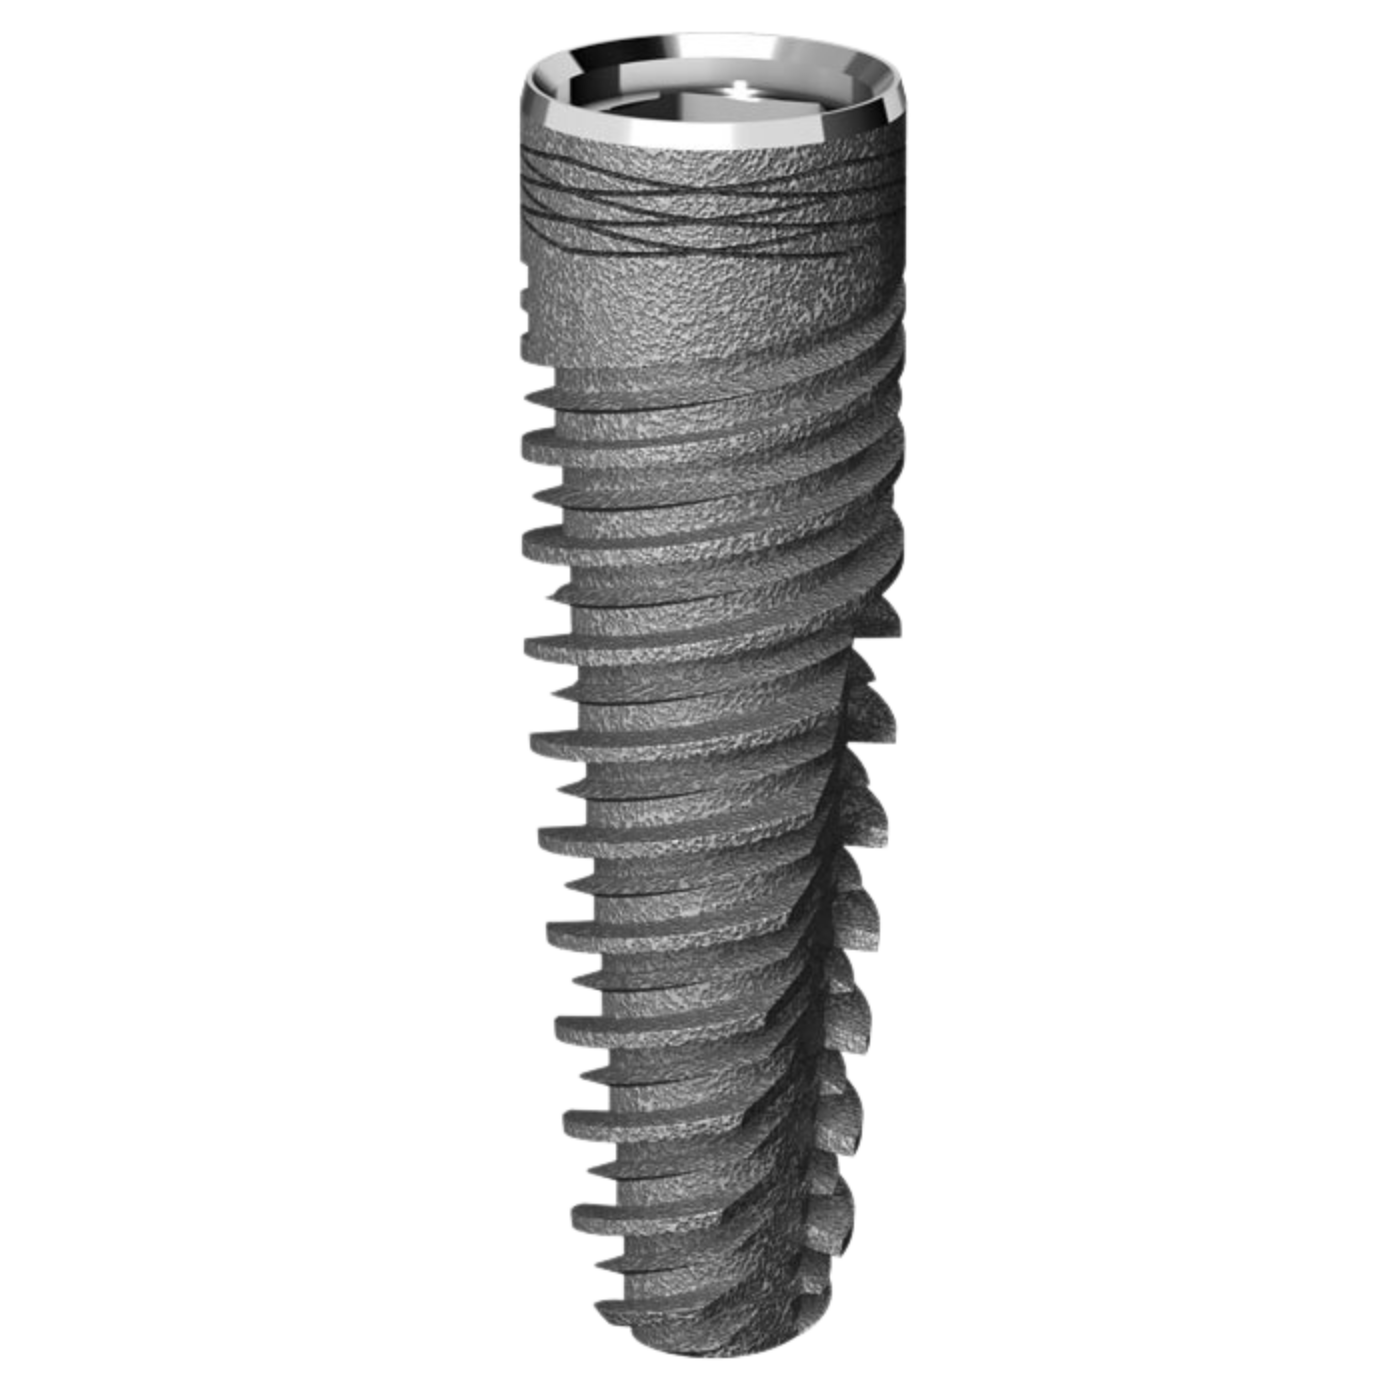 I5-3 CONICAL IMPLANT